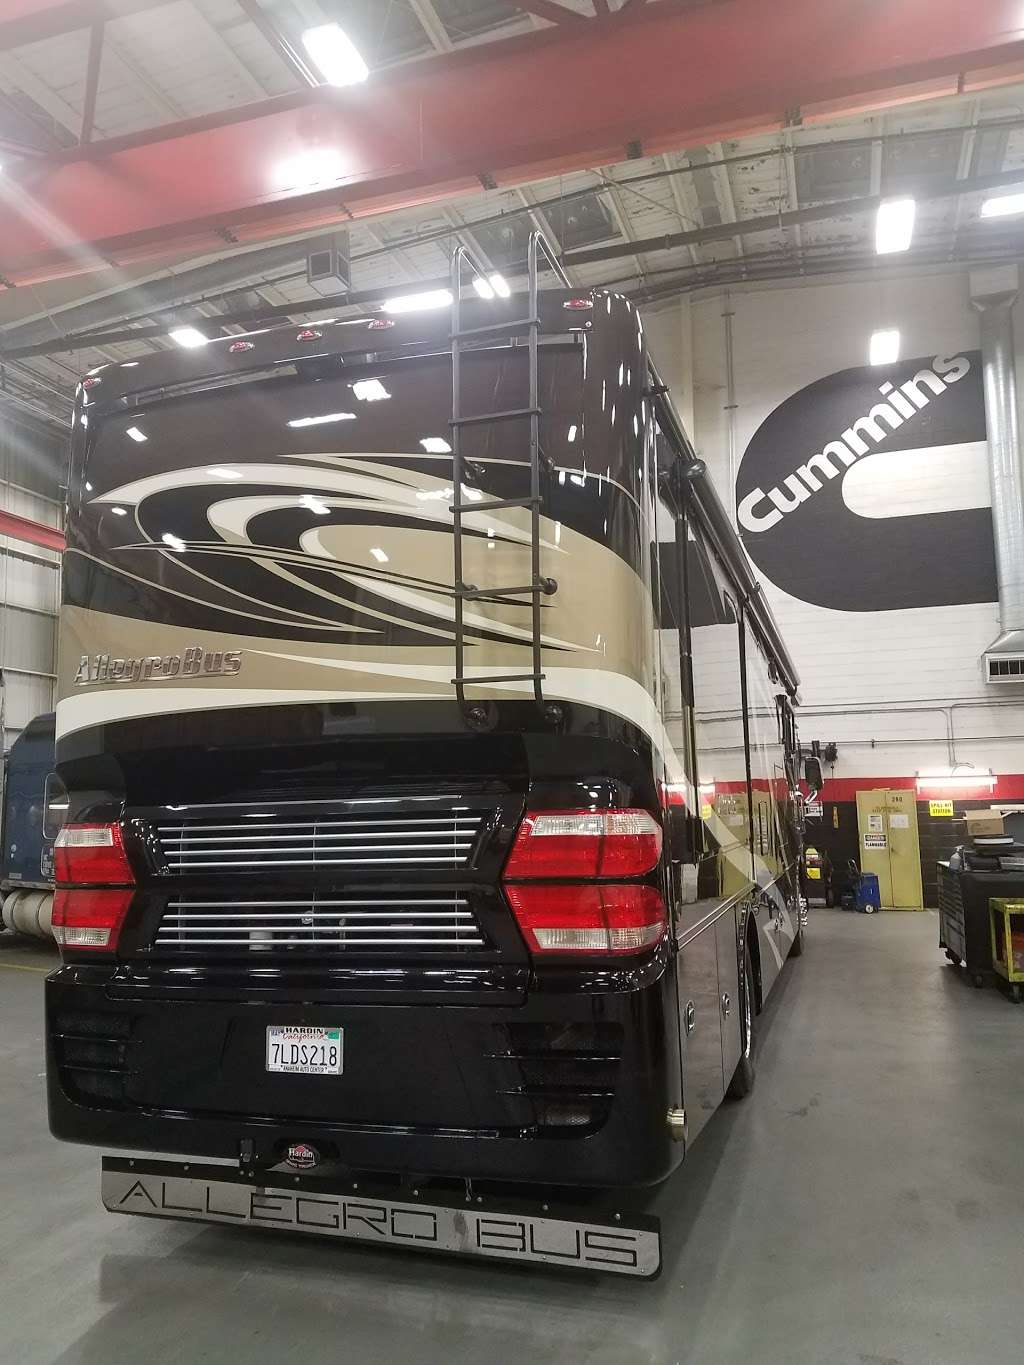 Cummins Sales and Service | 9520 Stewart and Gray Rd, Downey, CA 90241 | Phone: (866) 934-4373